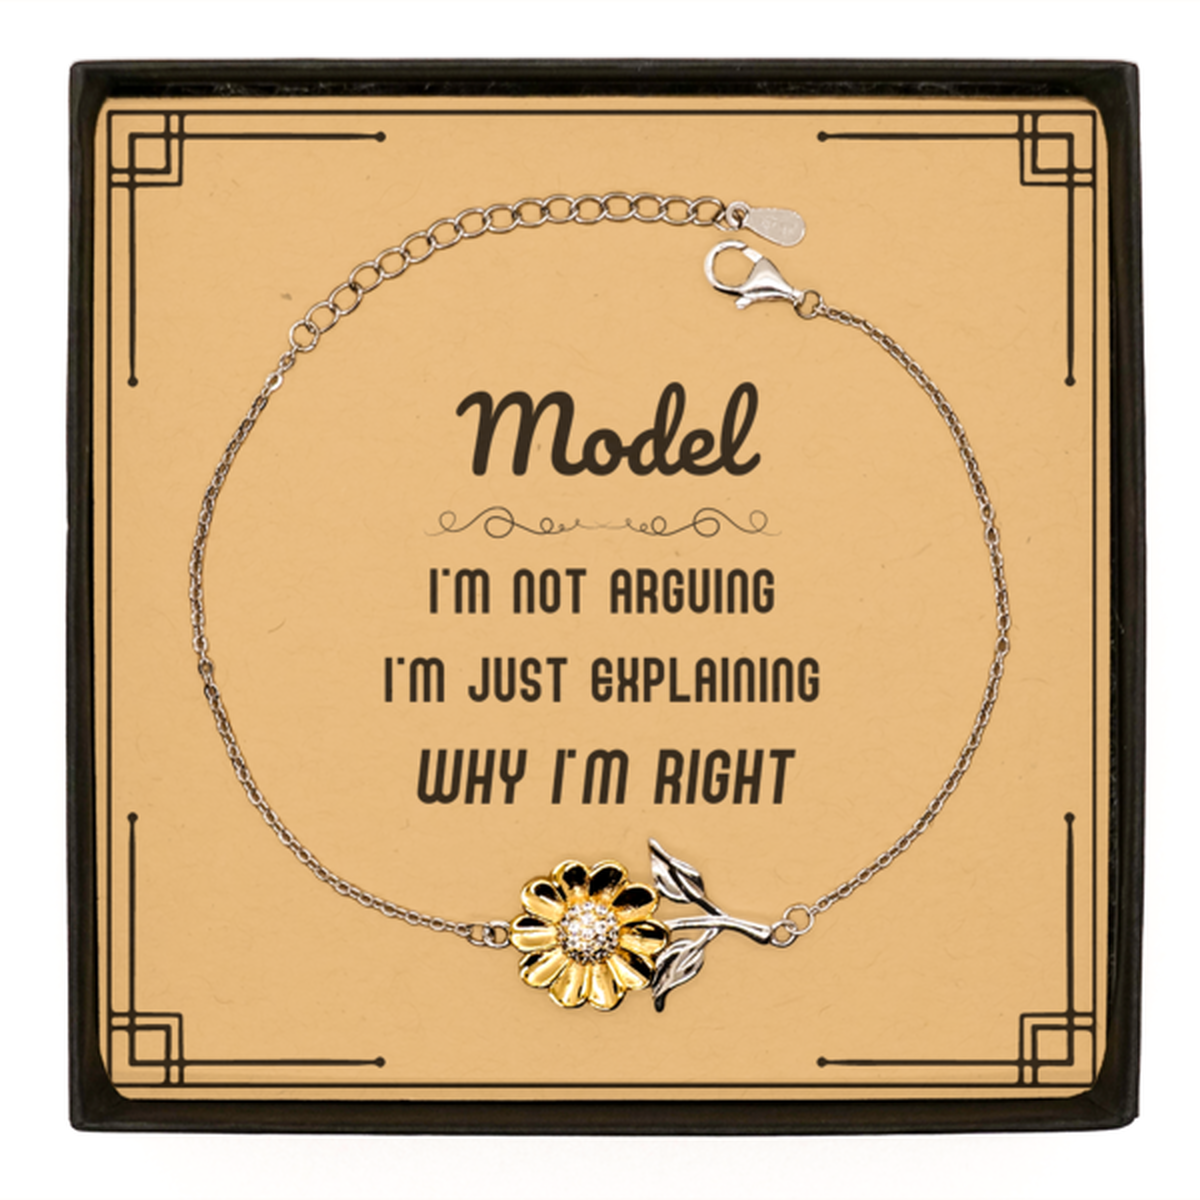 Model I'm not Arguing. I'm Just Explaining Why I'm RIGHT Sunflower Bracelet, Funny Saying Quote Model Gifts For Model Message Card Graduation Birthday Christmas Gifts for Men Women Coworker